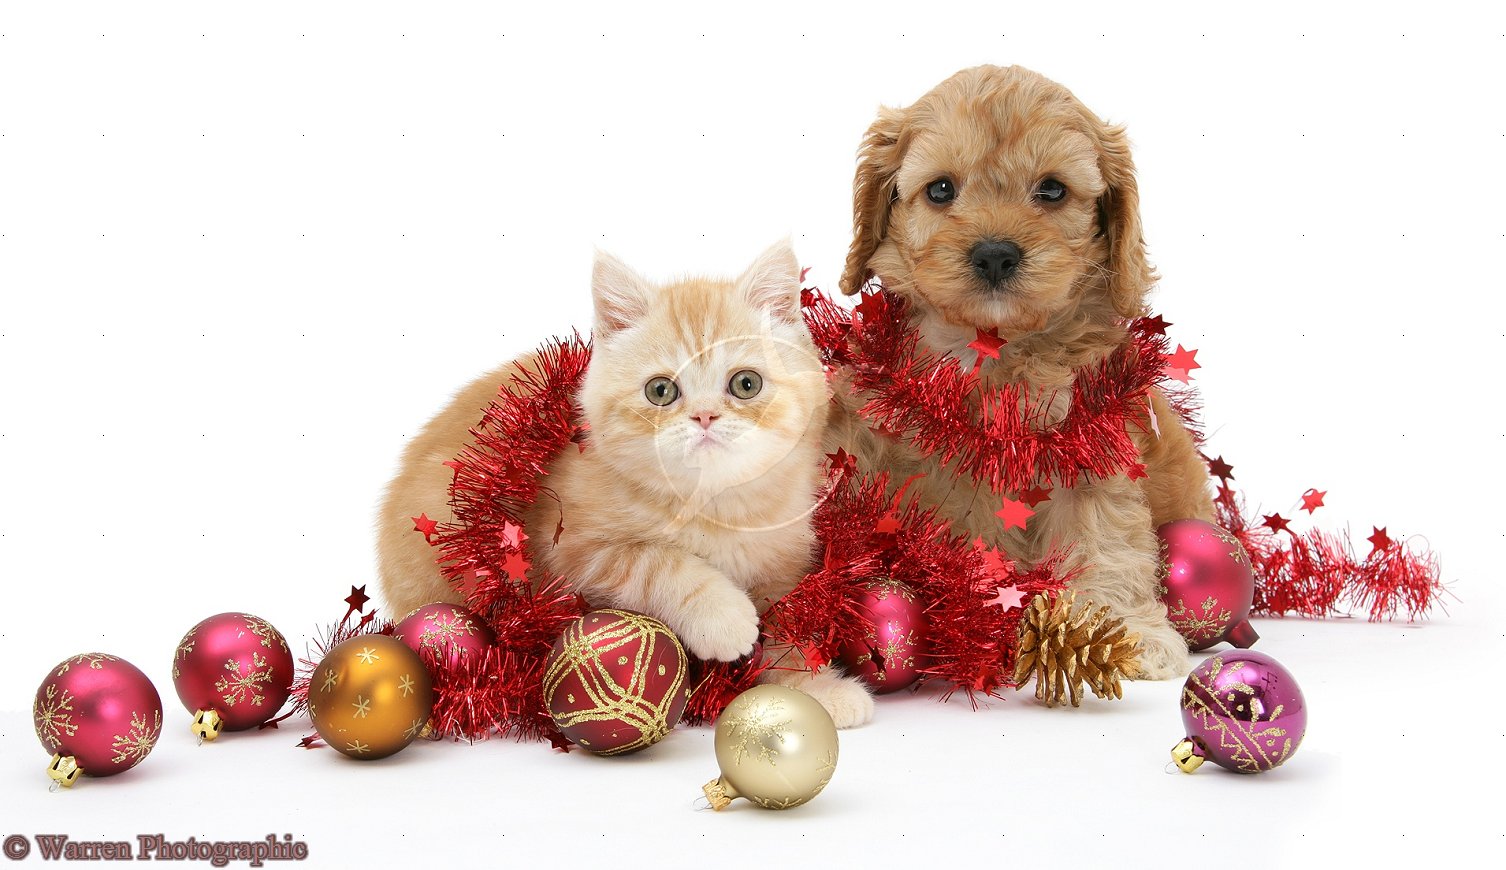 Cute Christmas Kittens And Puppies 9683 Hd Wallpapers in Celebrations